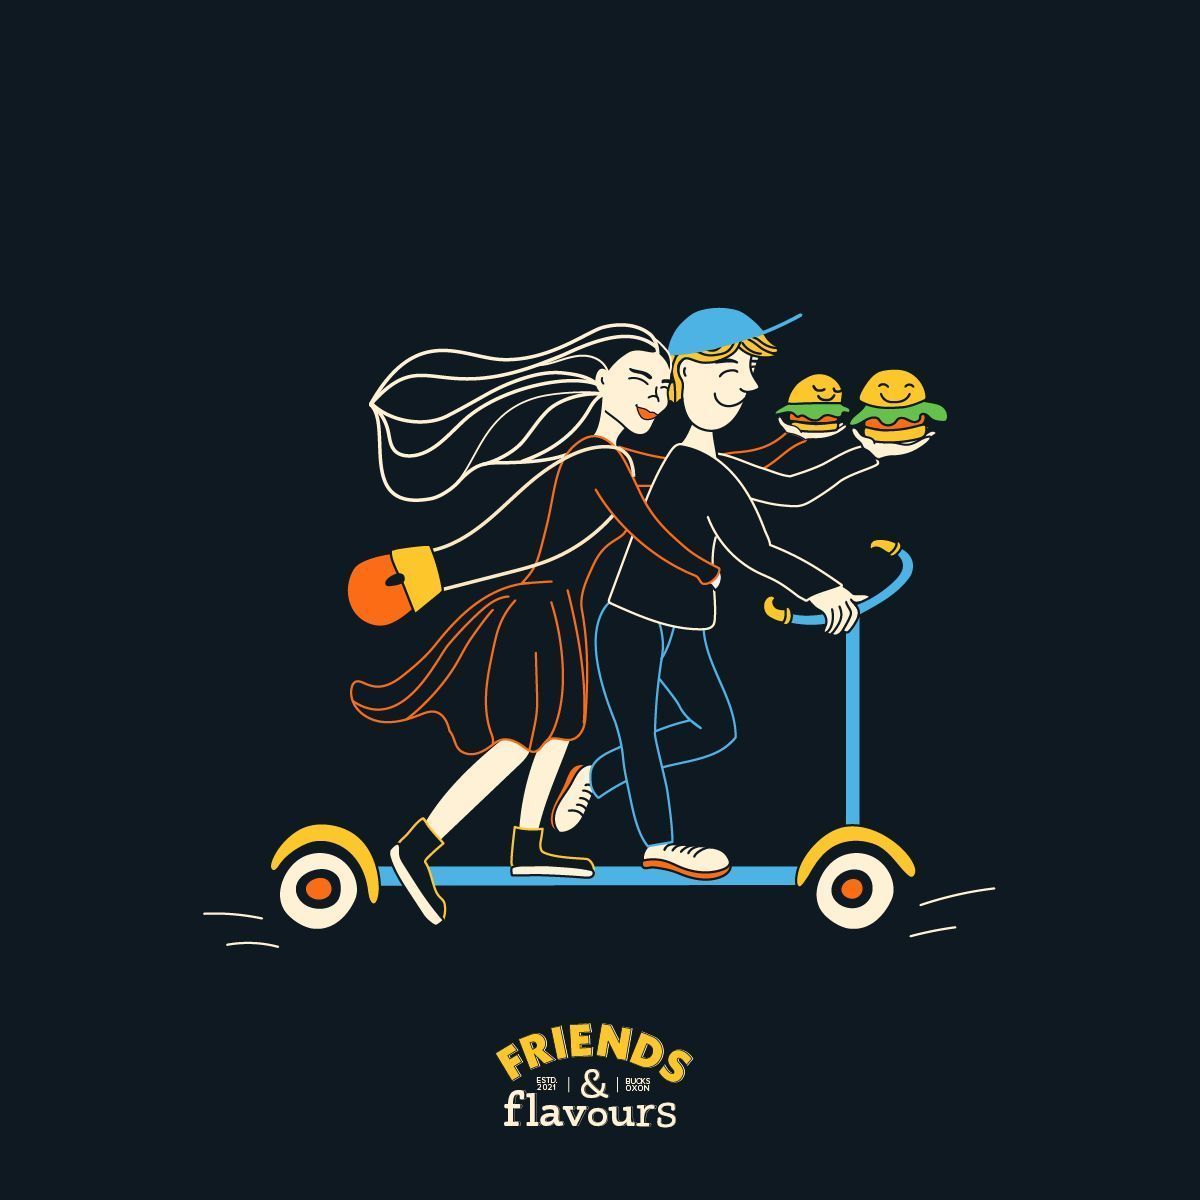 Spring is in the air  😎 🌸 😁 Can you feel it? Sprinkled with love and flavoured with our irresistible burgers 🍔 😋 🍔 

#burgeratfriends #friendsandflavours #spring #springisintheair #springfun #loveisintheair #burger #gourmetburger #burgers #gourmetburgers #smashedburgers